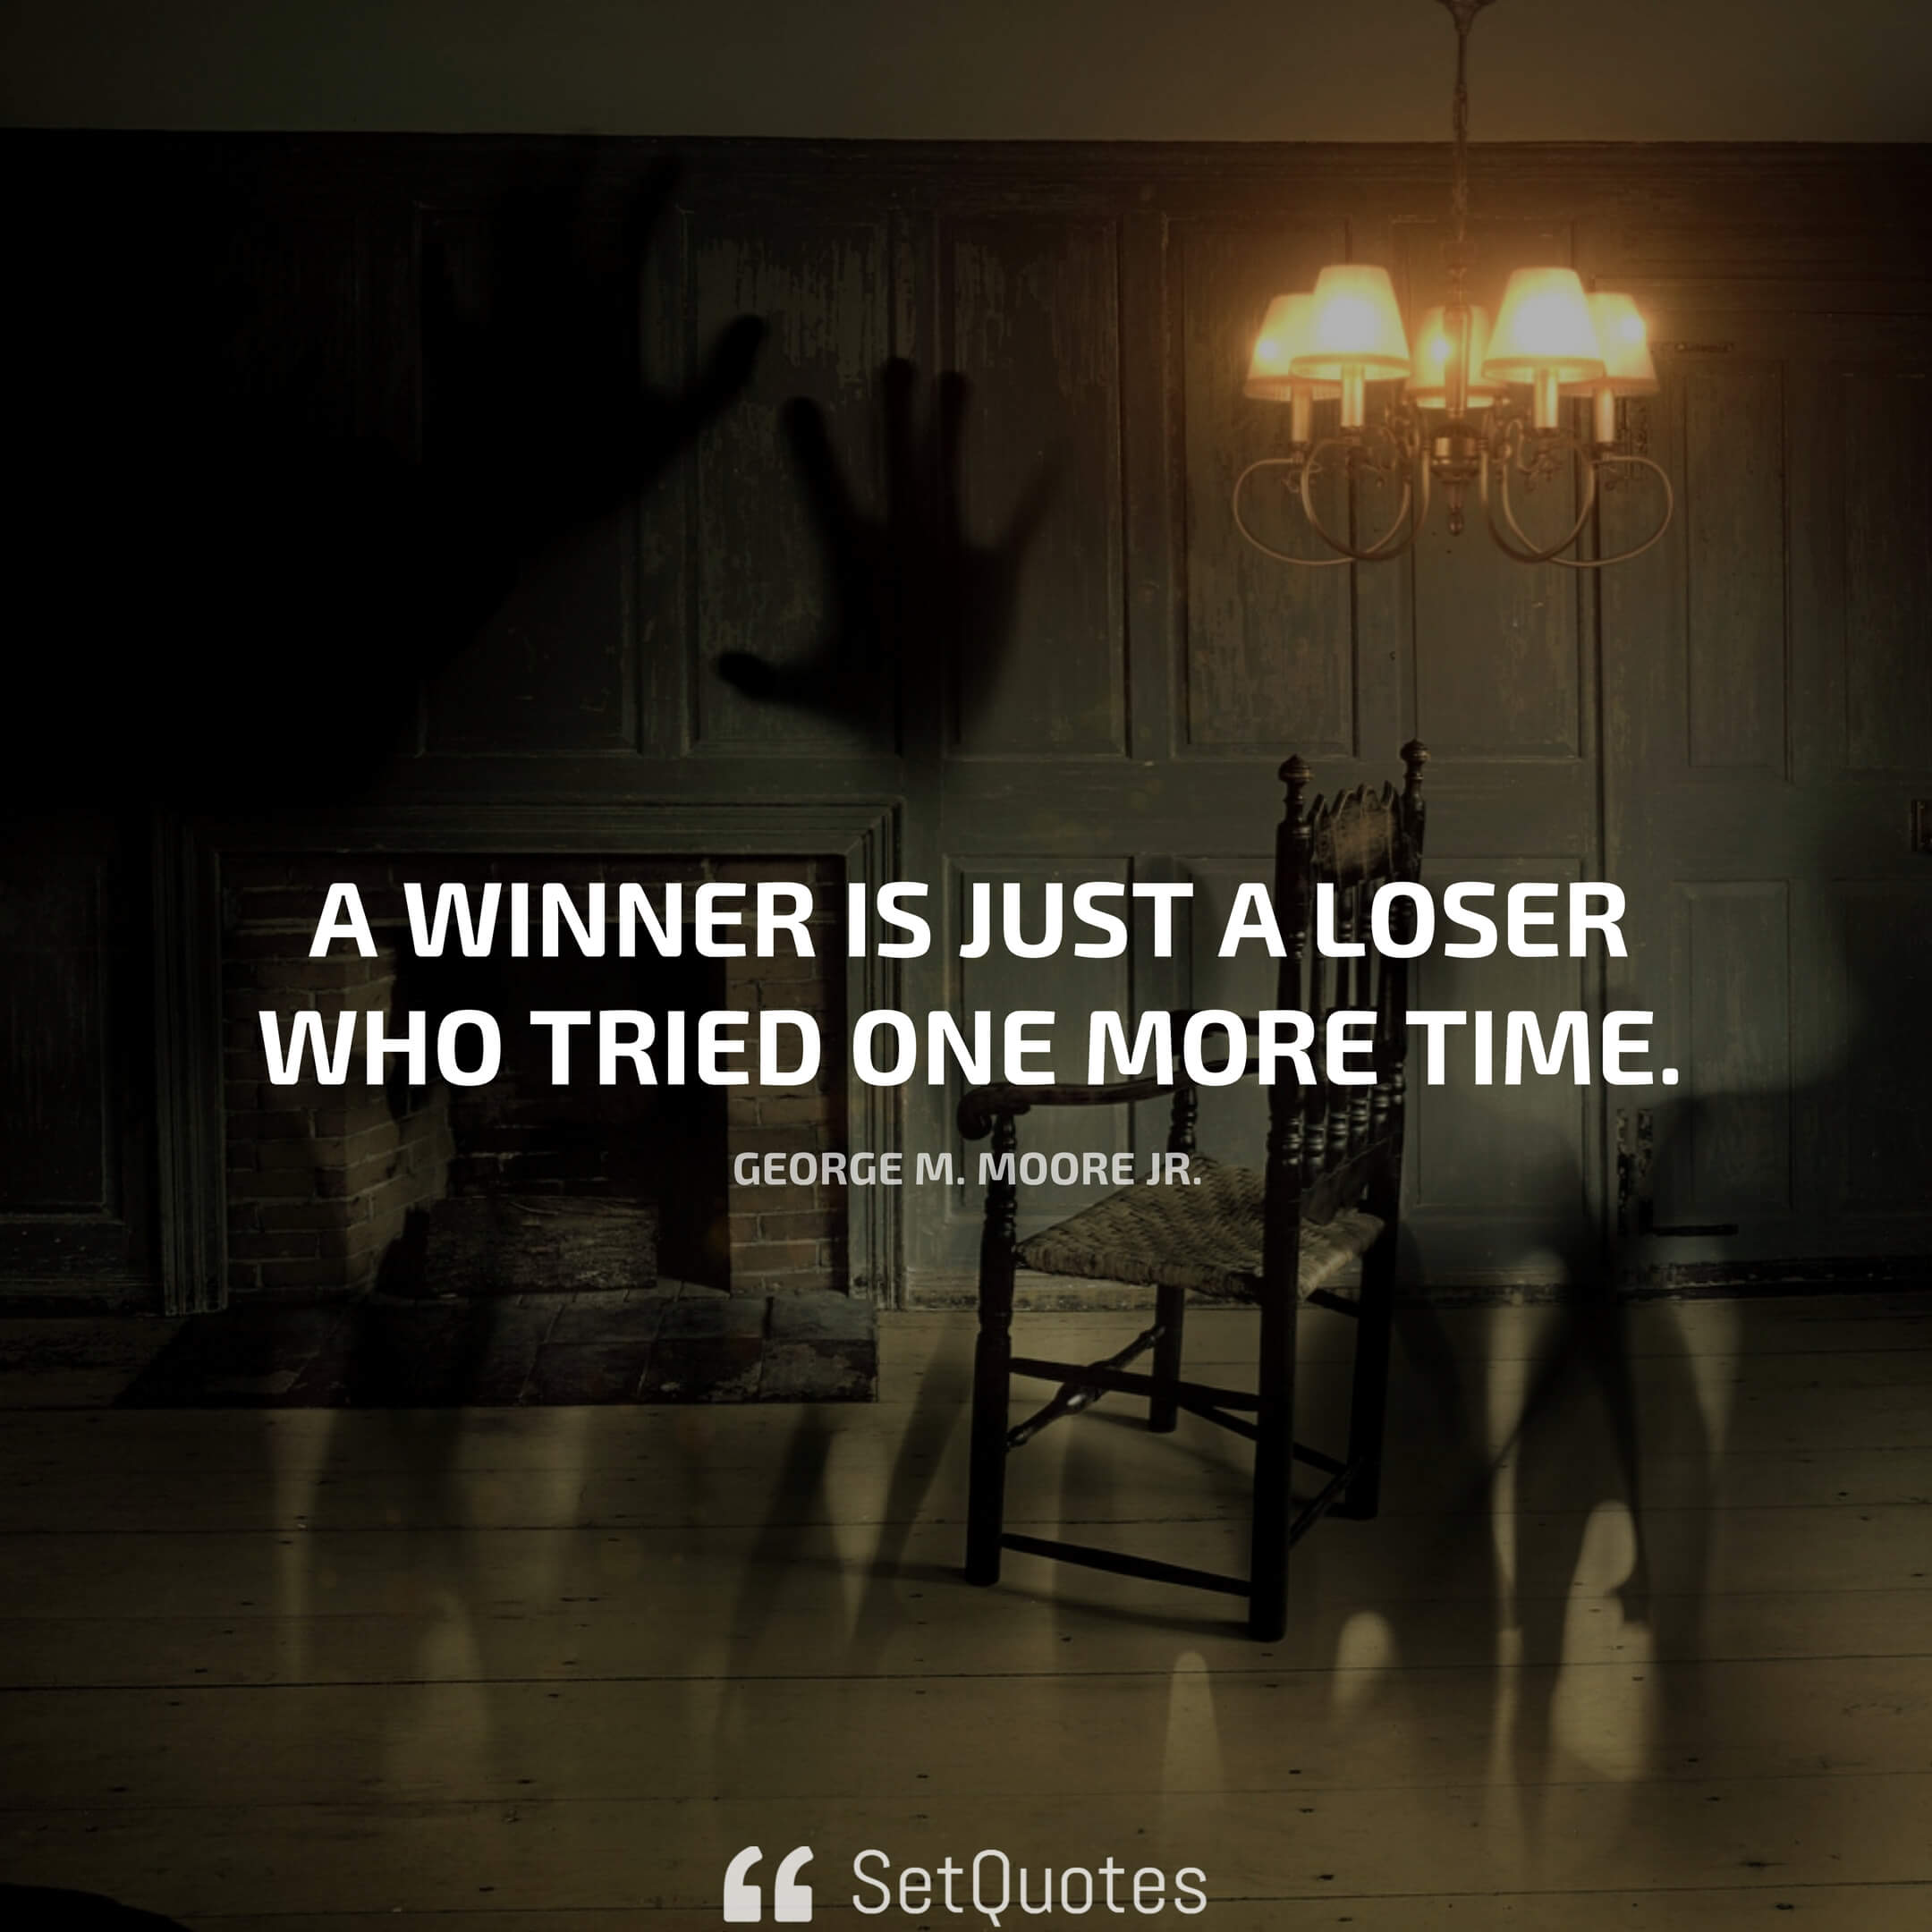 A winner is just a loser who tried one more time. – George M. Moore Jr.